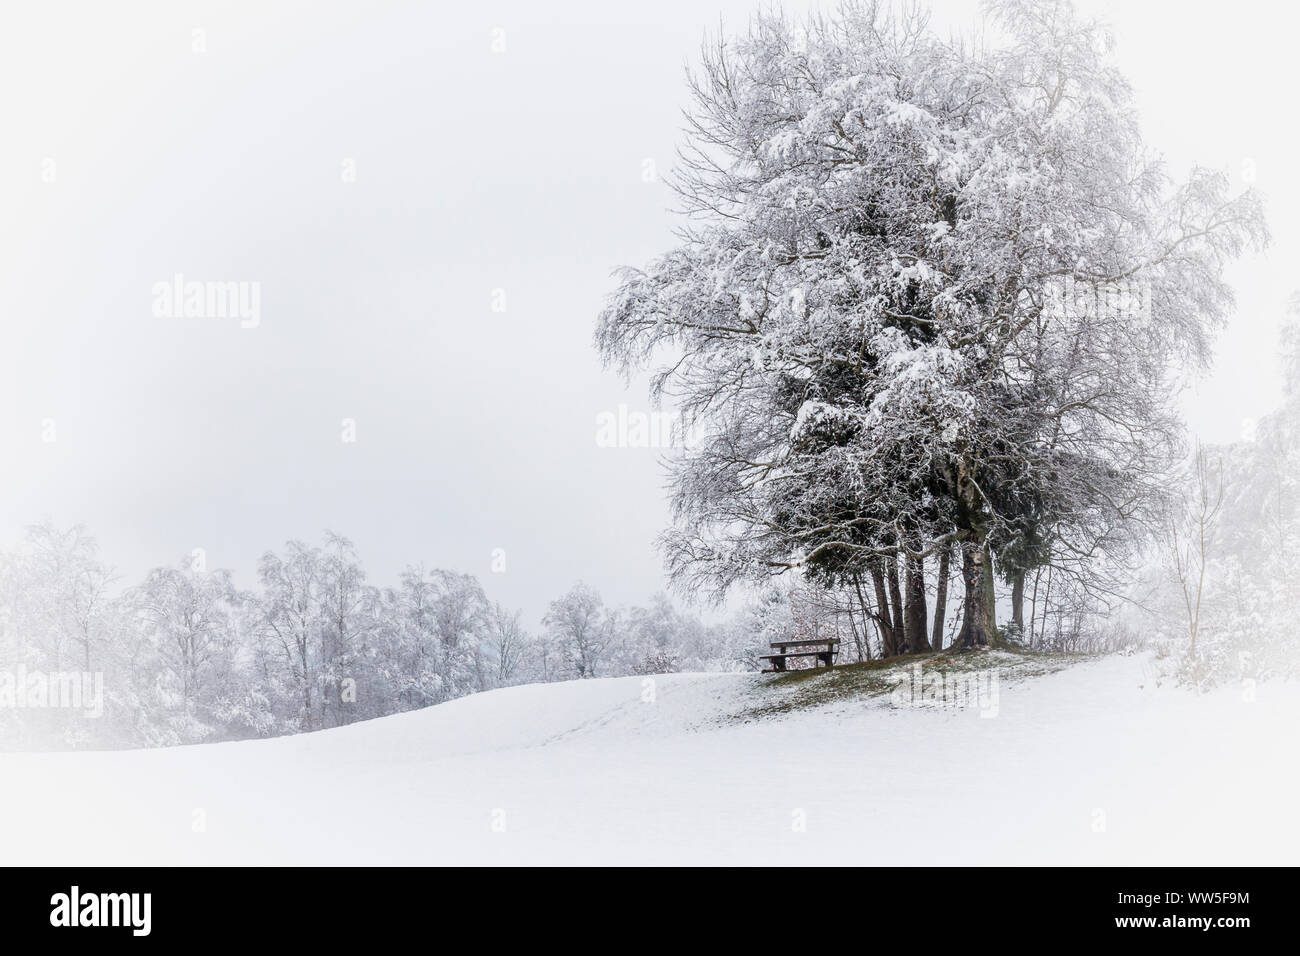 A quiet space on a bench under a snow-covered tree, Stock Photo